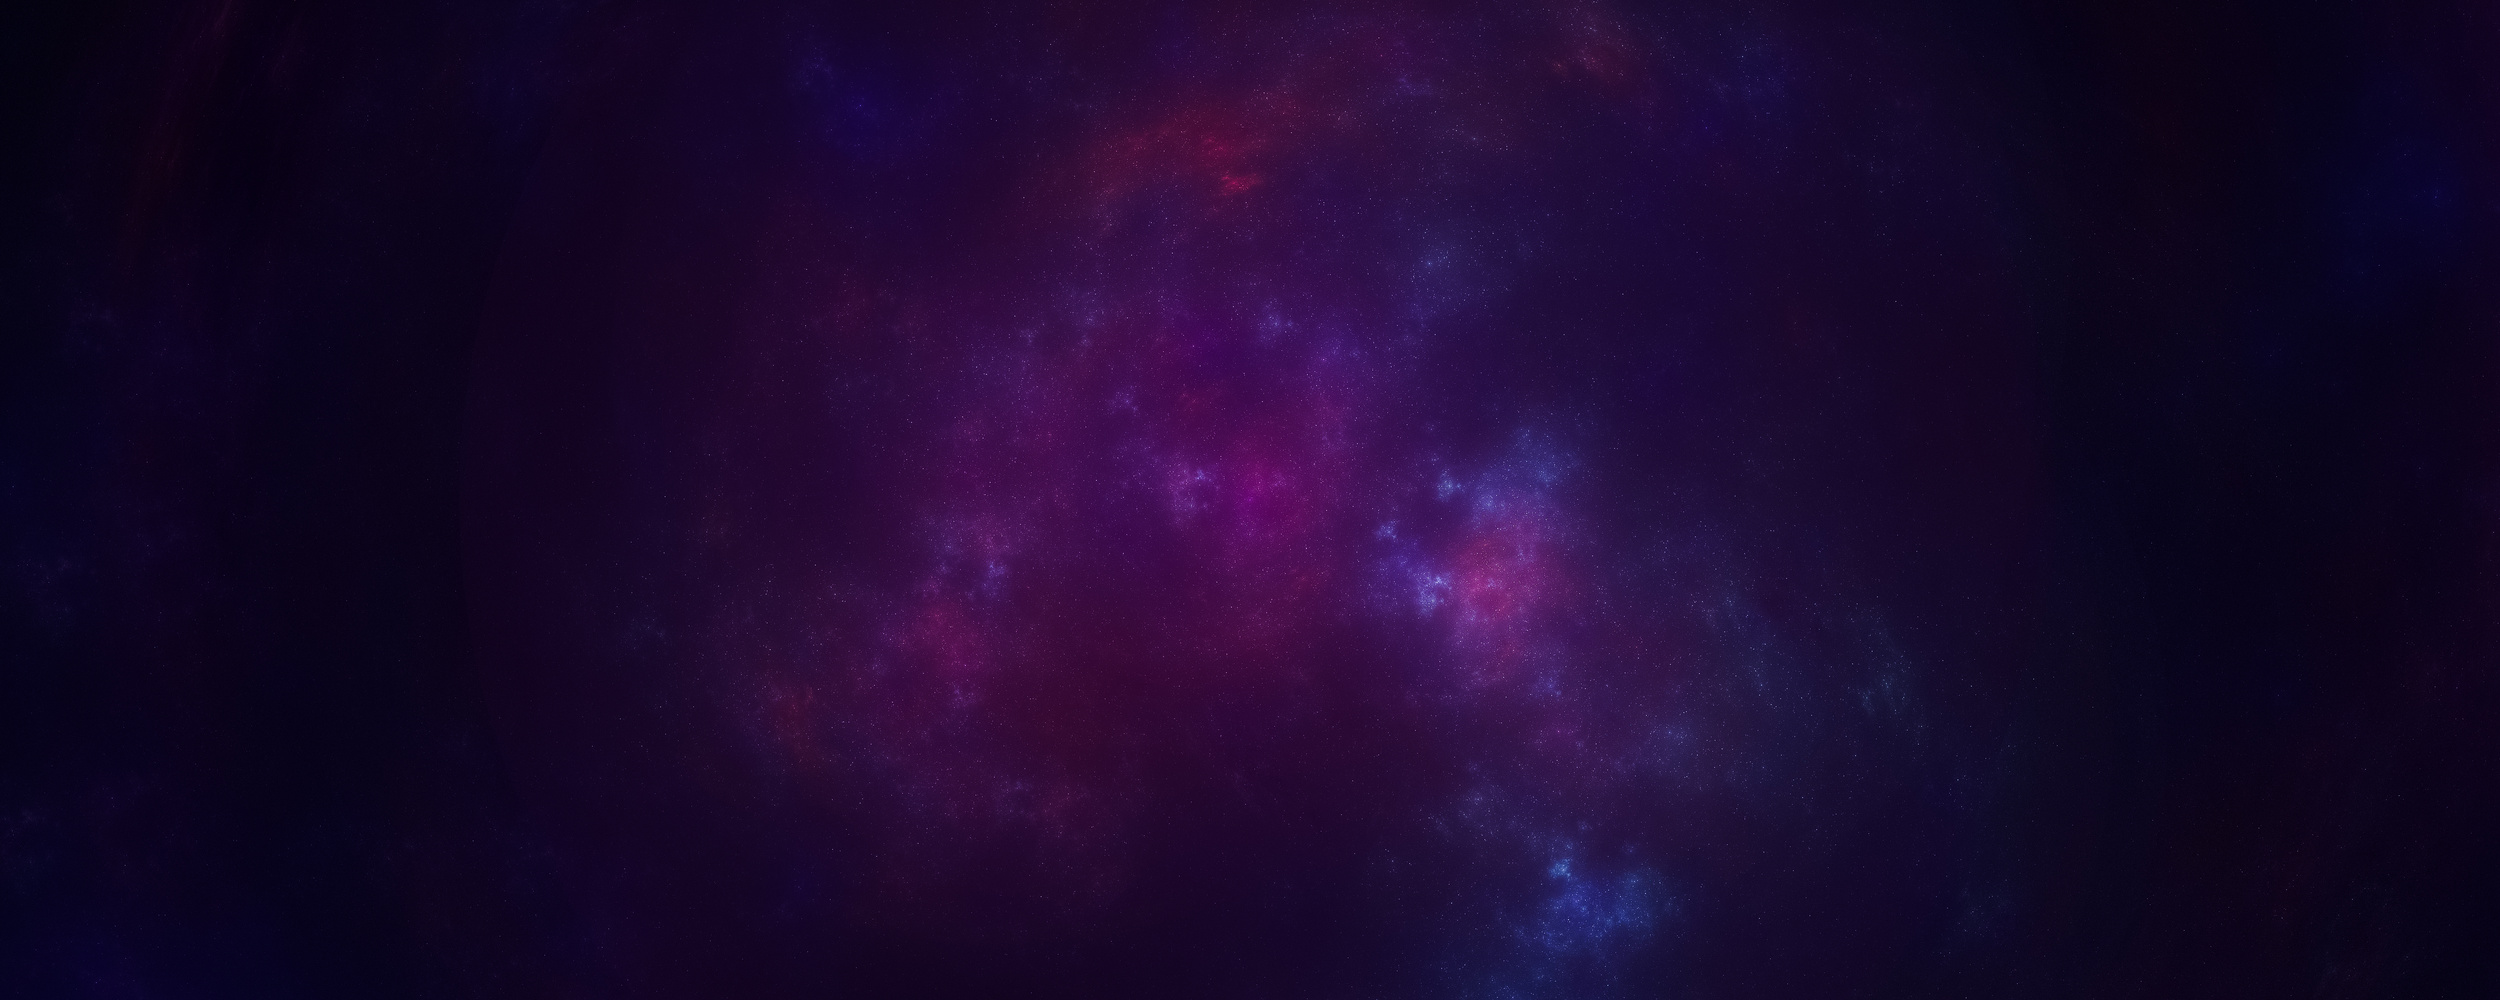 Purple blue dust particles background. Star, galaxy, space, cloud	
